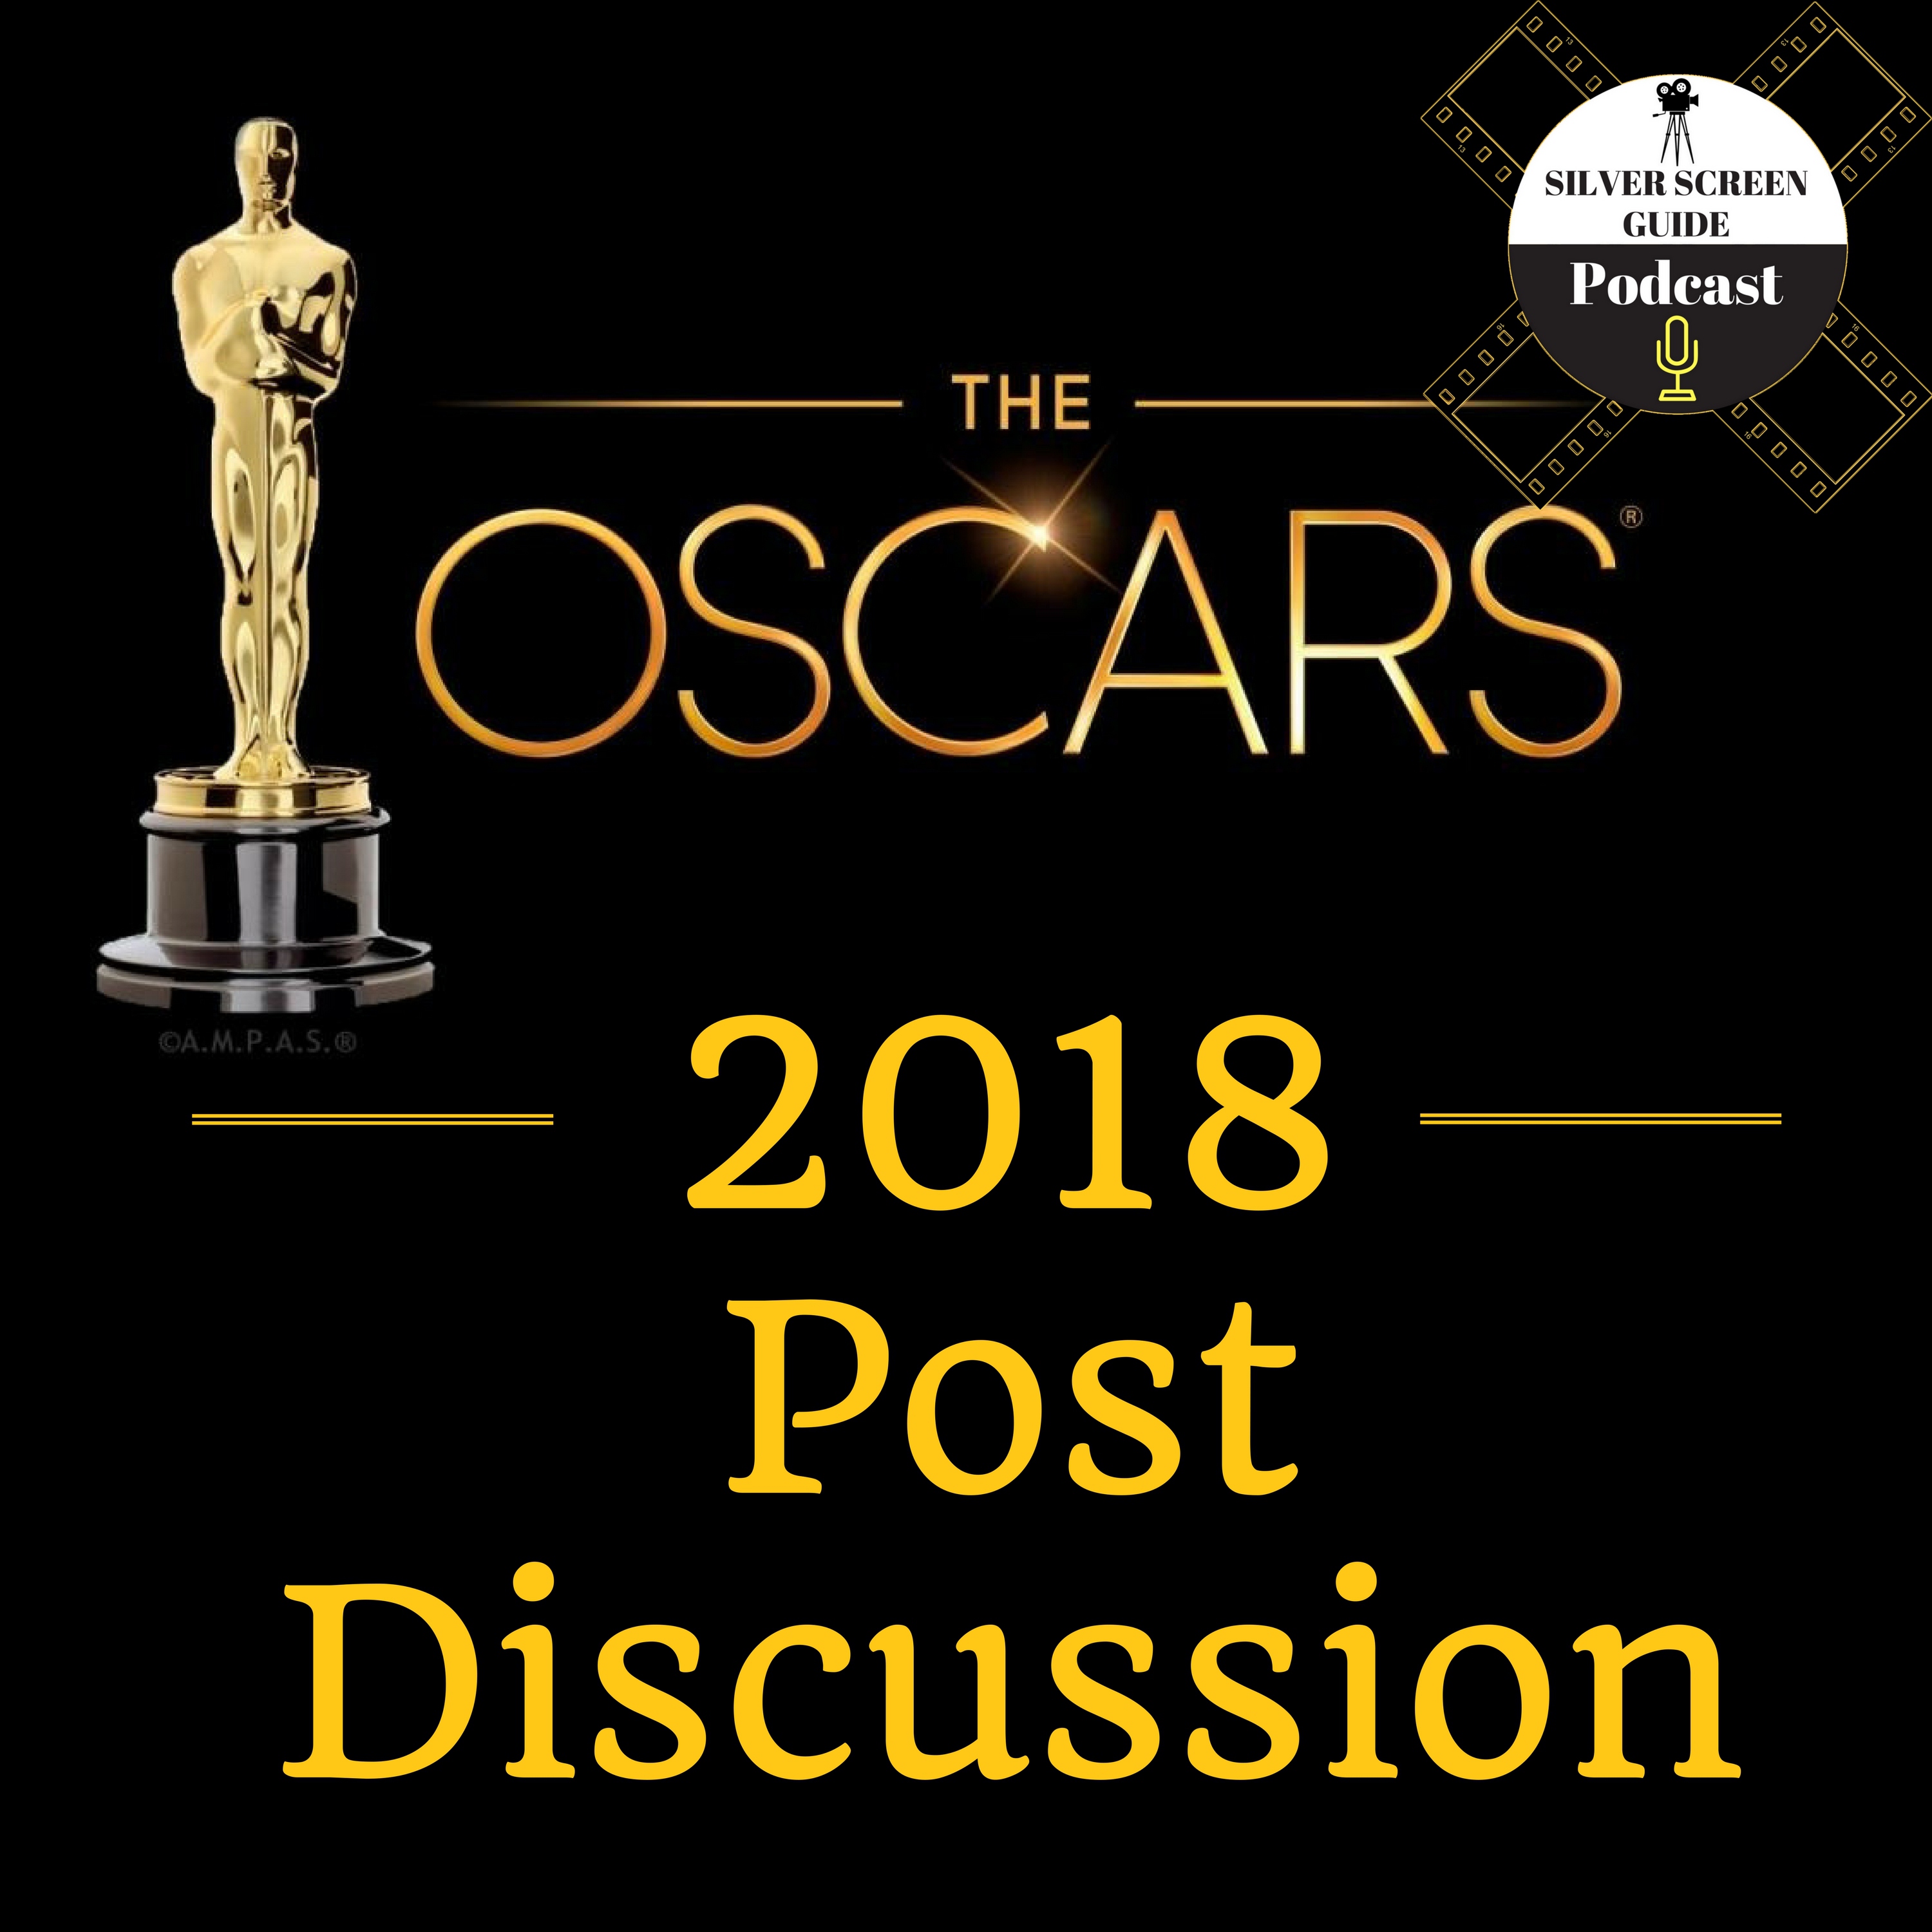 The Oscars 2018 | Post Discussion